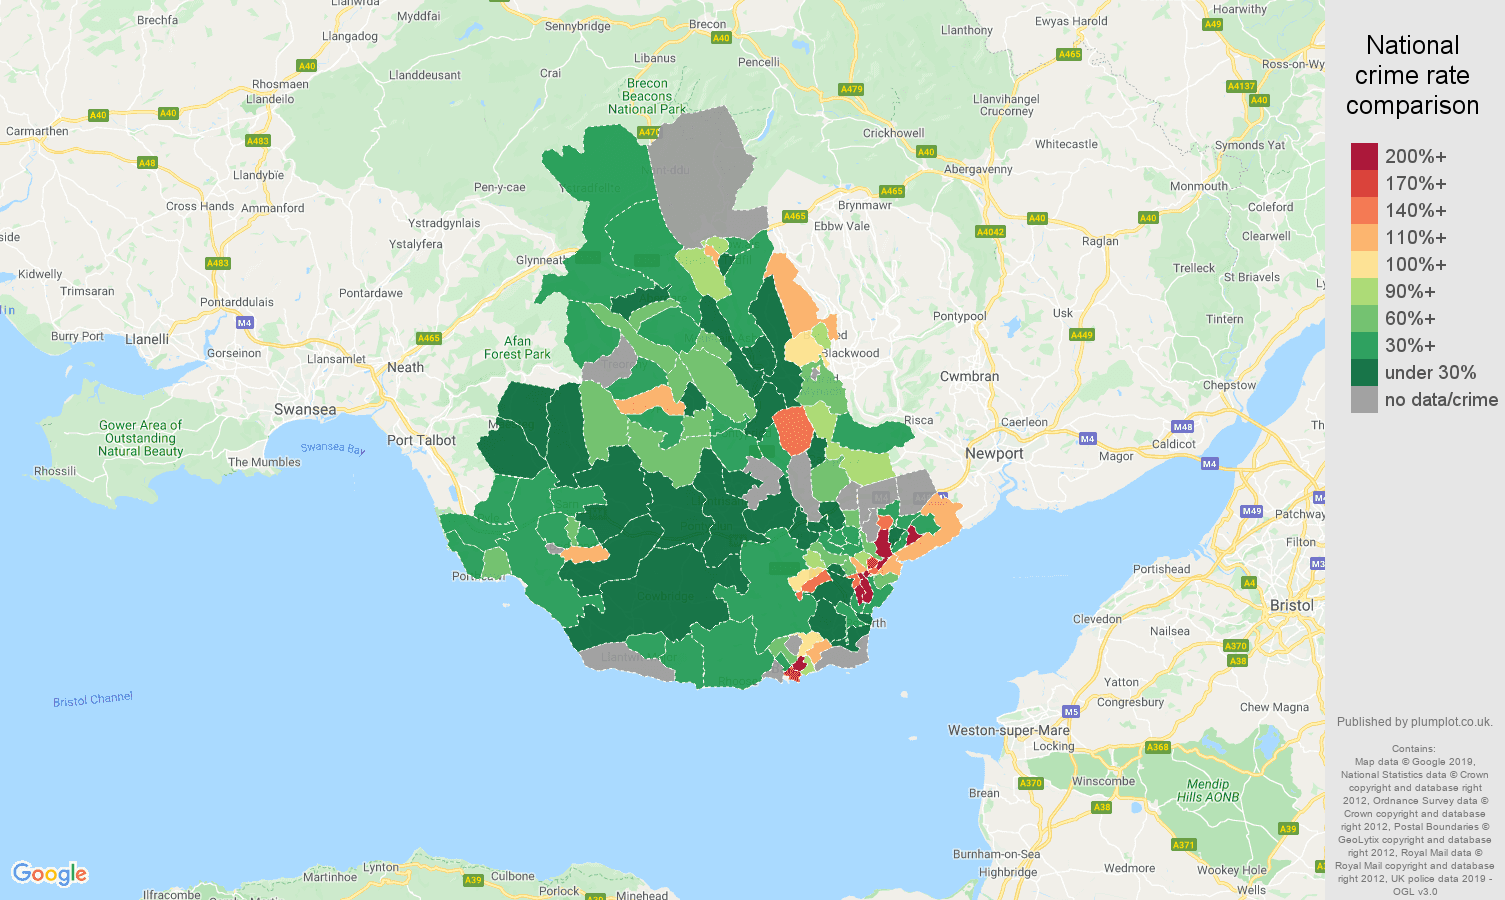 Cardiff possession of weapons crime rate comparison map